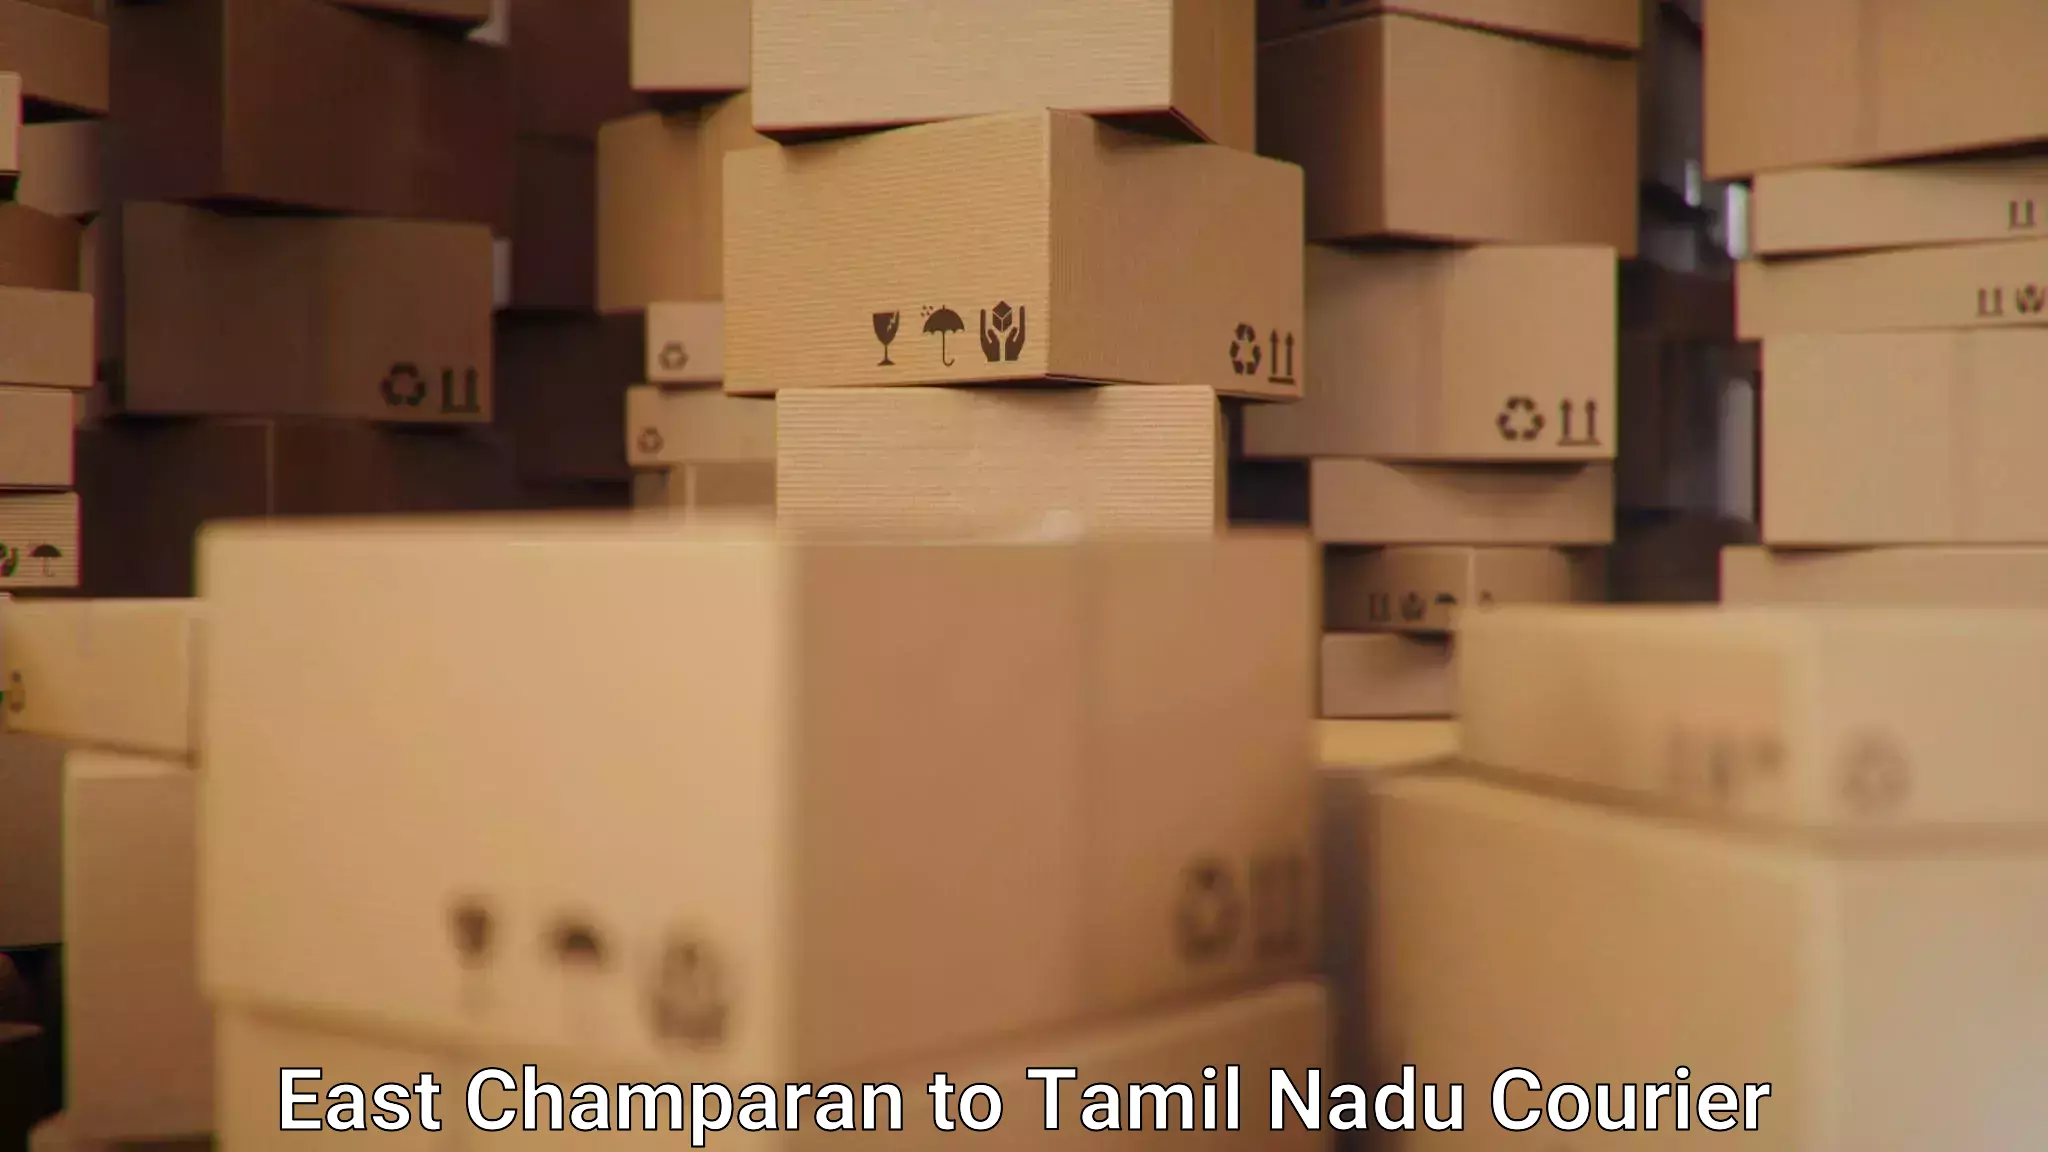 Courier service efficiency East Champaran to Tamil Nadu